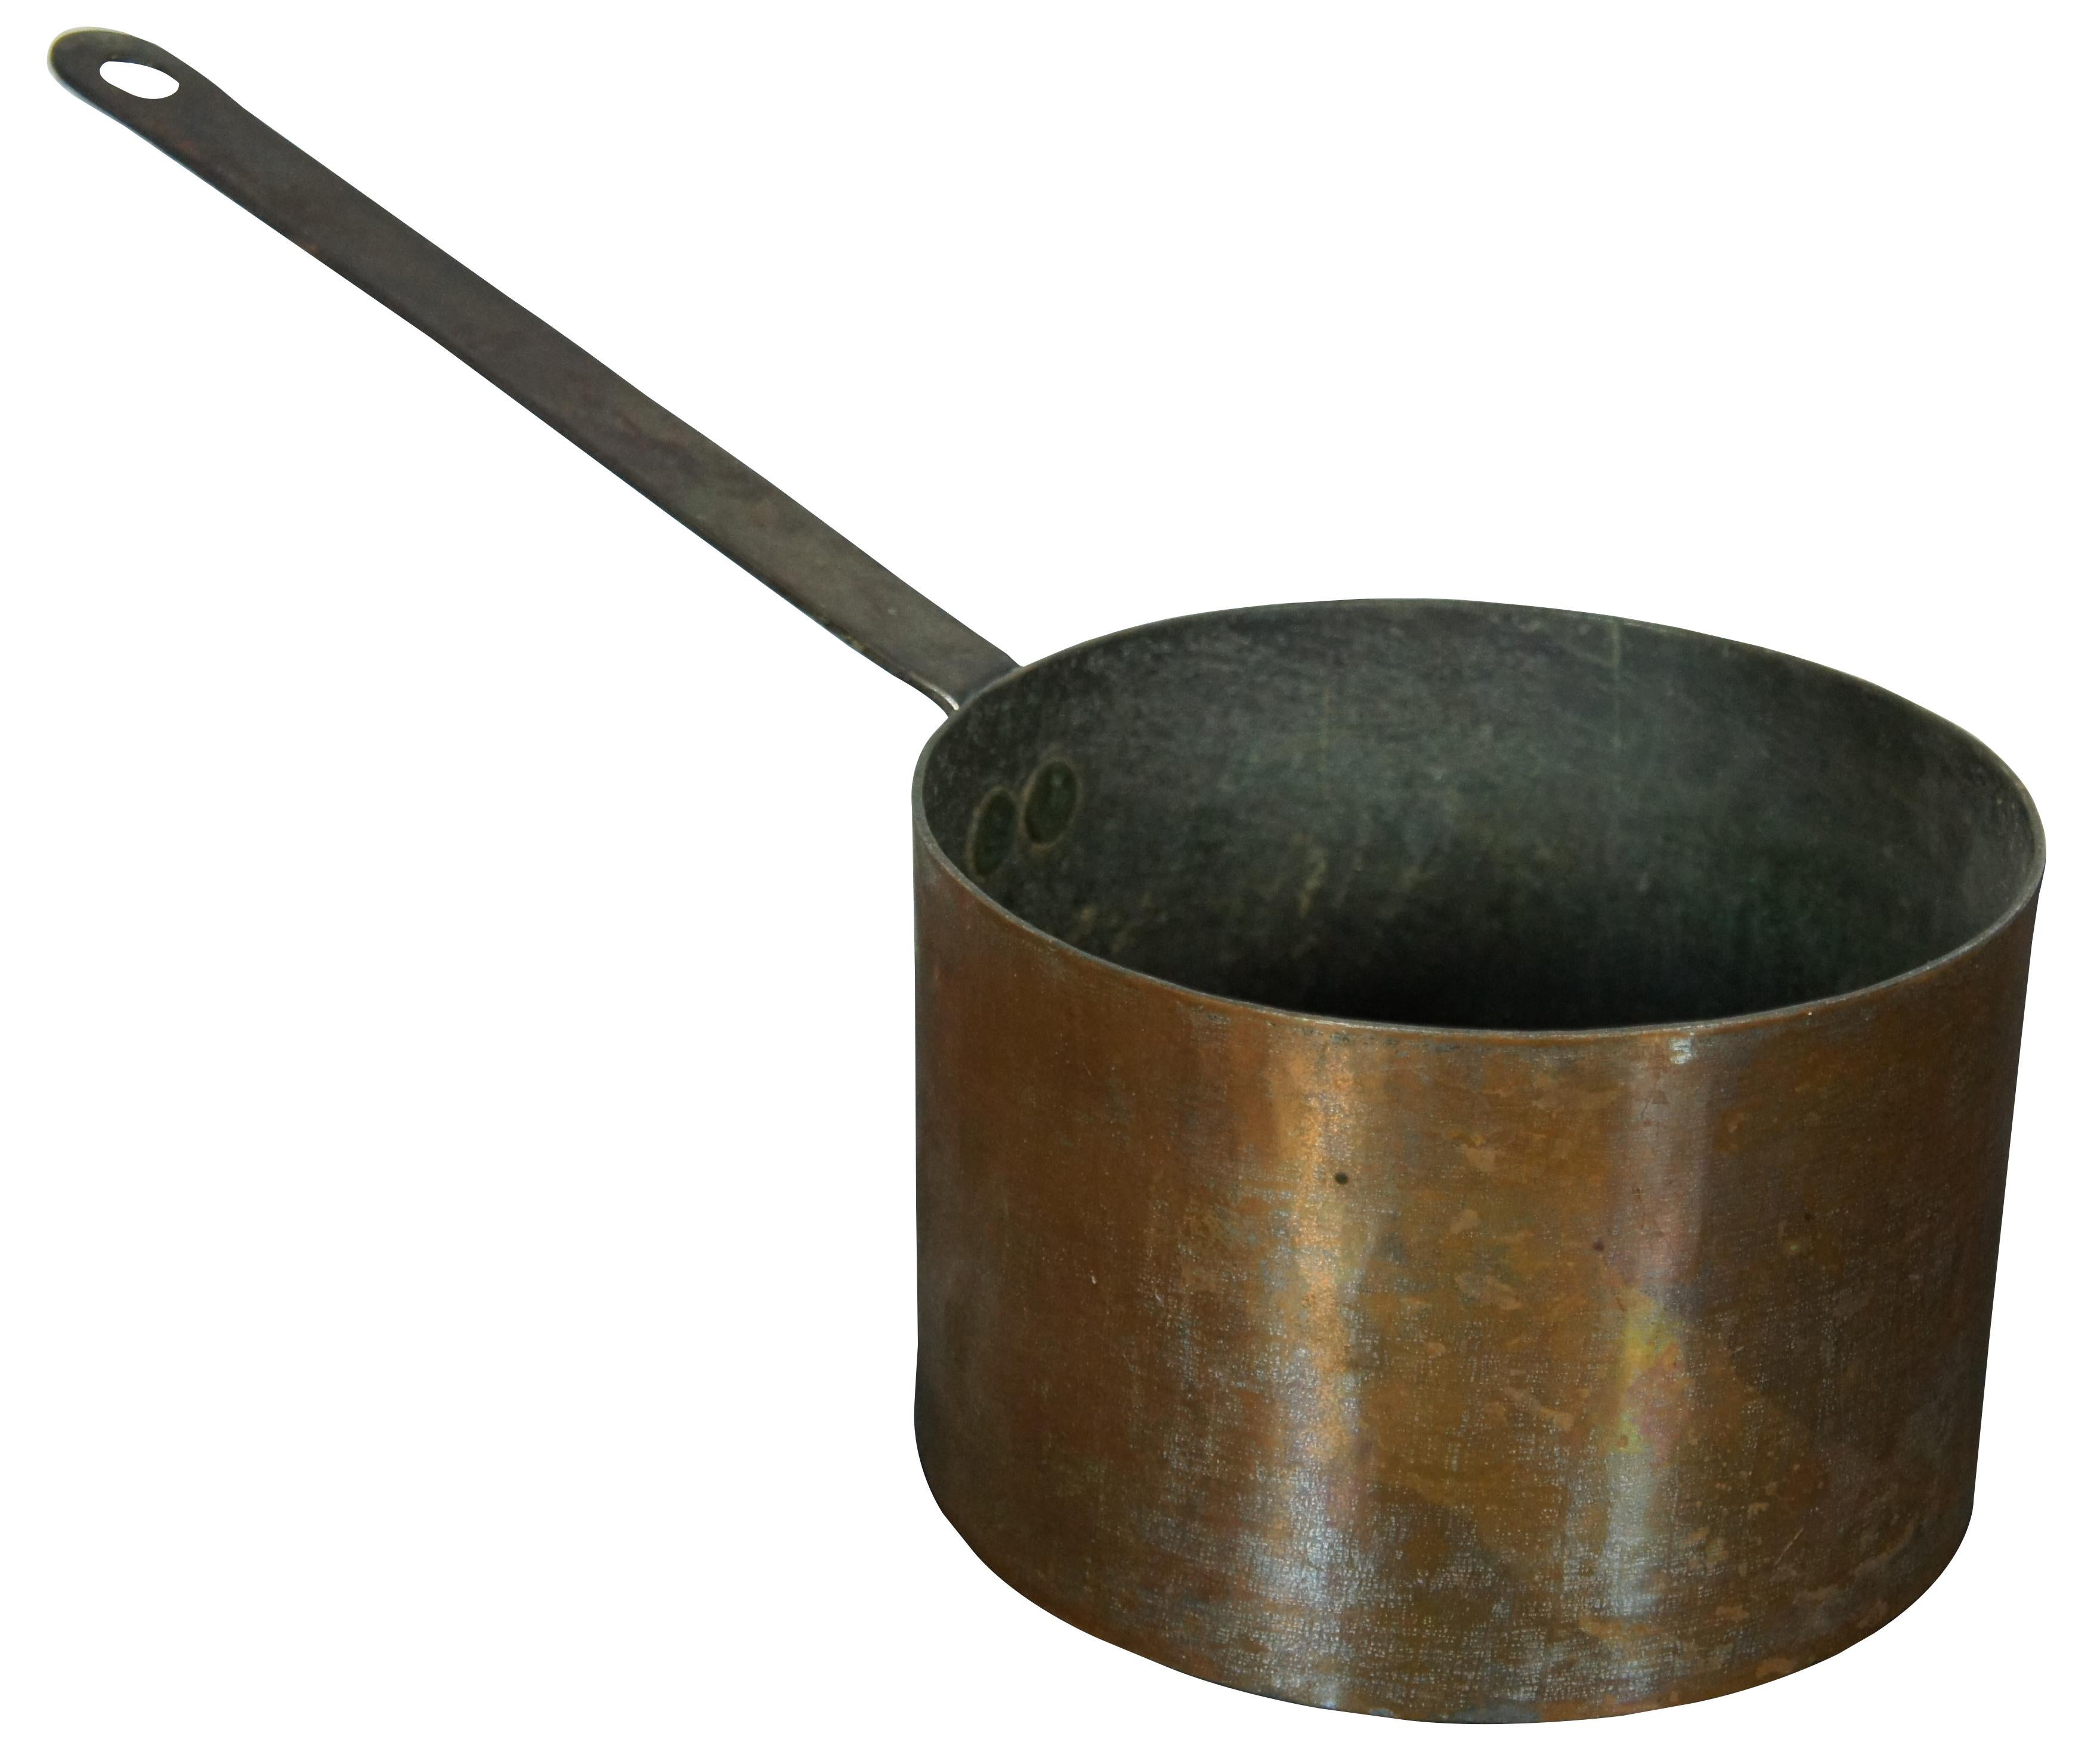 Antique copper sauce pan with iron handle; possibly marked with an M at the base of the handle.

Measures: 15.5” x 7.25” x 4.75” / Height of Handle – 8” (Width x Depth x Height).